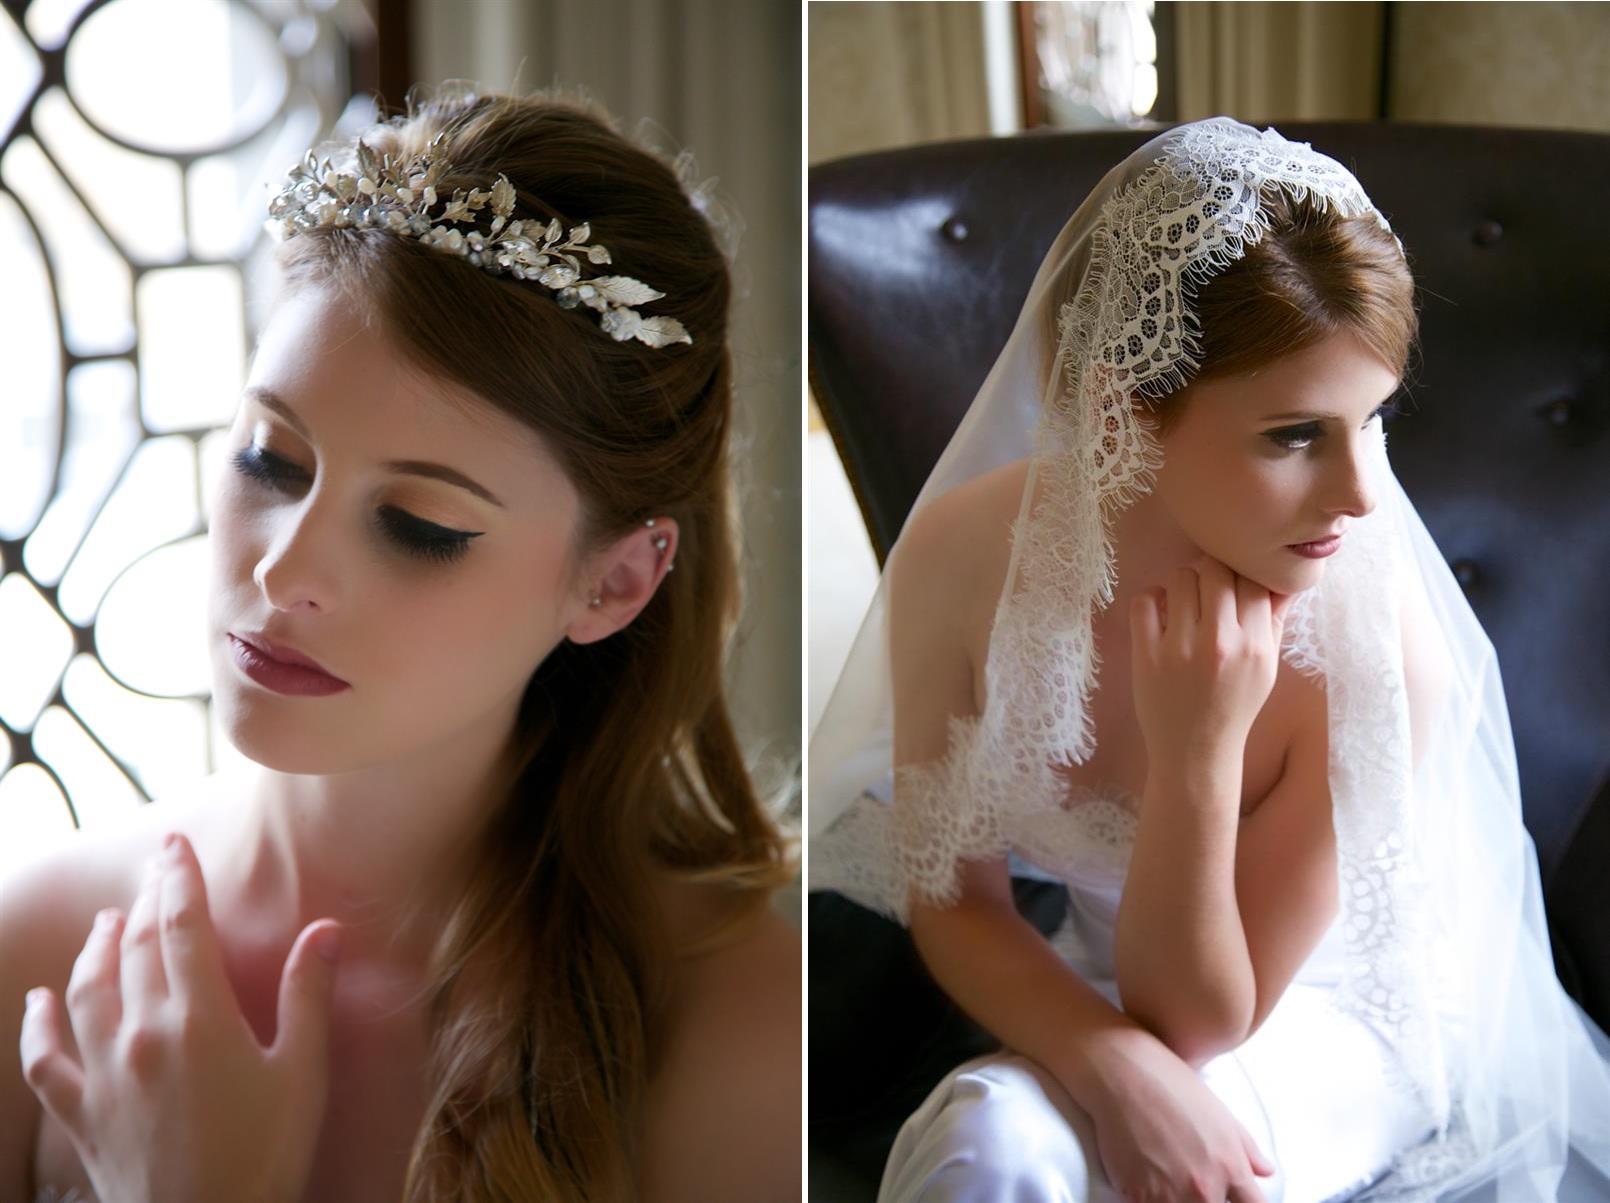 Glamorous Bridal Headpieces from Gilded Shadows - Silver Crown